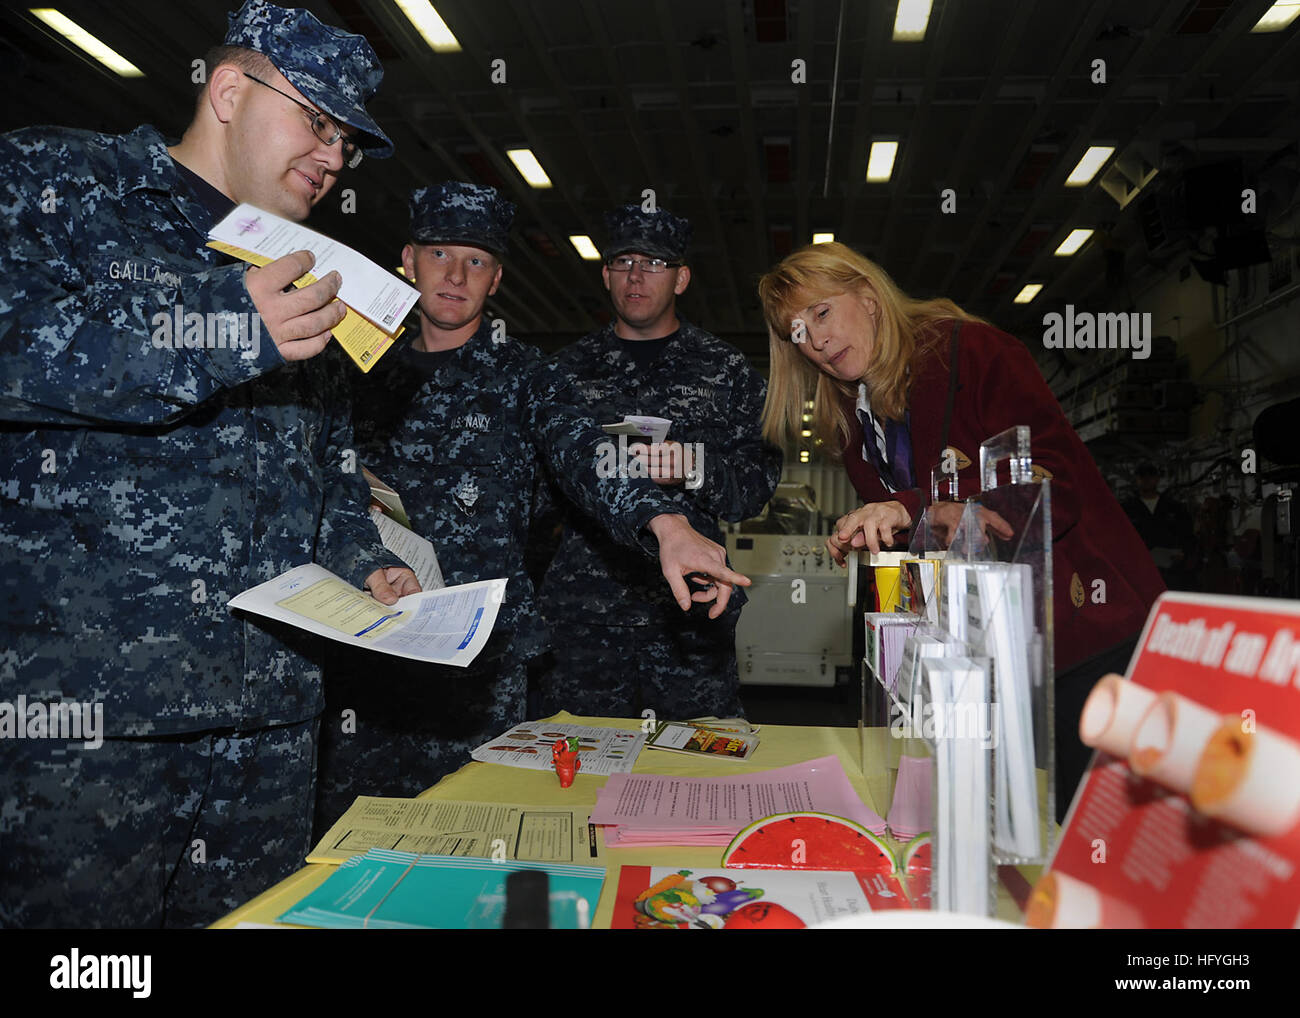 101116-N-1947A-005  SAN DIEGO (Nov. 16, 2010) Sailors speak with Monique Beauchamp, a public health educator from Naval Medical Center San Diego, aboard the amphibious assault ship USS Makin Island (LHD 8) during the commandÕs first shipboard health fair. The fair was sponsored by the shipÕs medical department and educated the crew on various health, nutrition and wellness issues. (U.S. Navy photo by Mass Communication Specialist 2nd Class Kellie Abedzadeh/Released) US Navy 101116-N-1947A-005 Sailors speak with Monique Beauchamp, a public health educator from Naval Medical Center San Diego Stock Photo